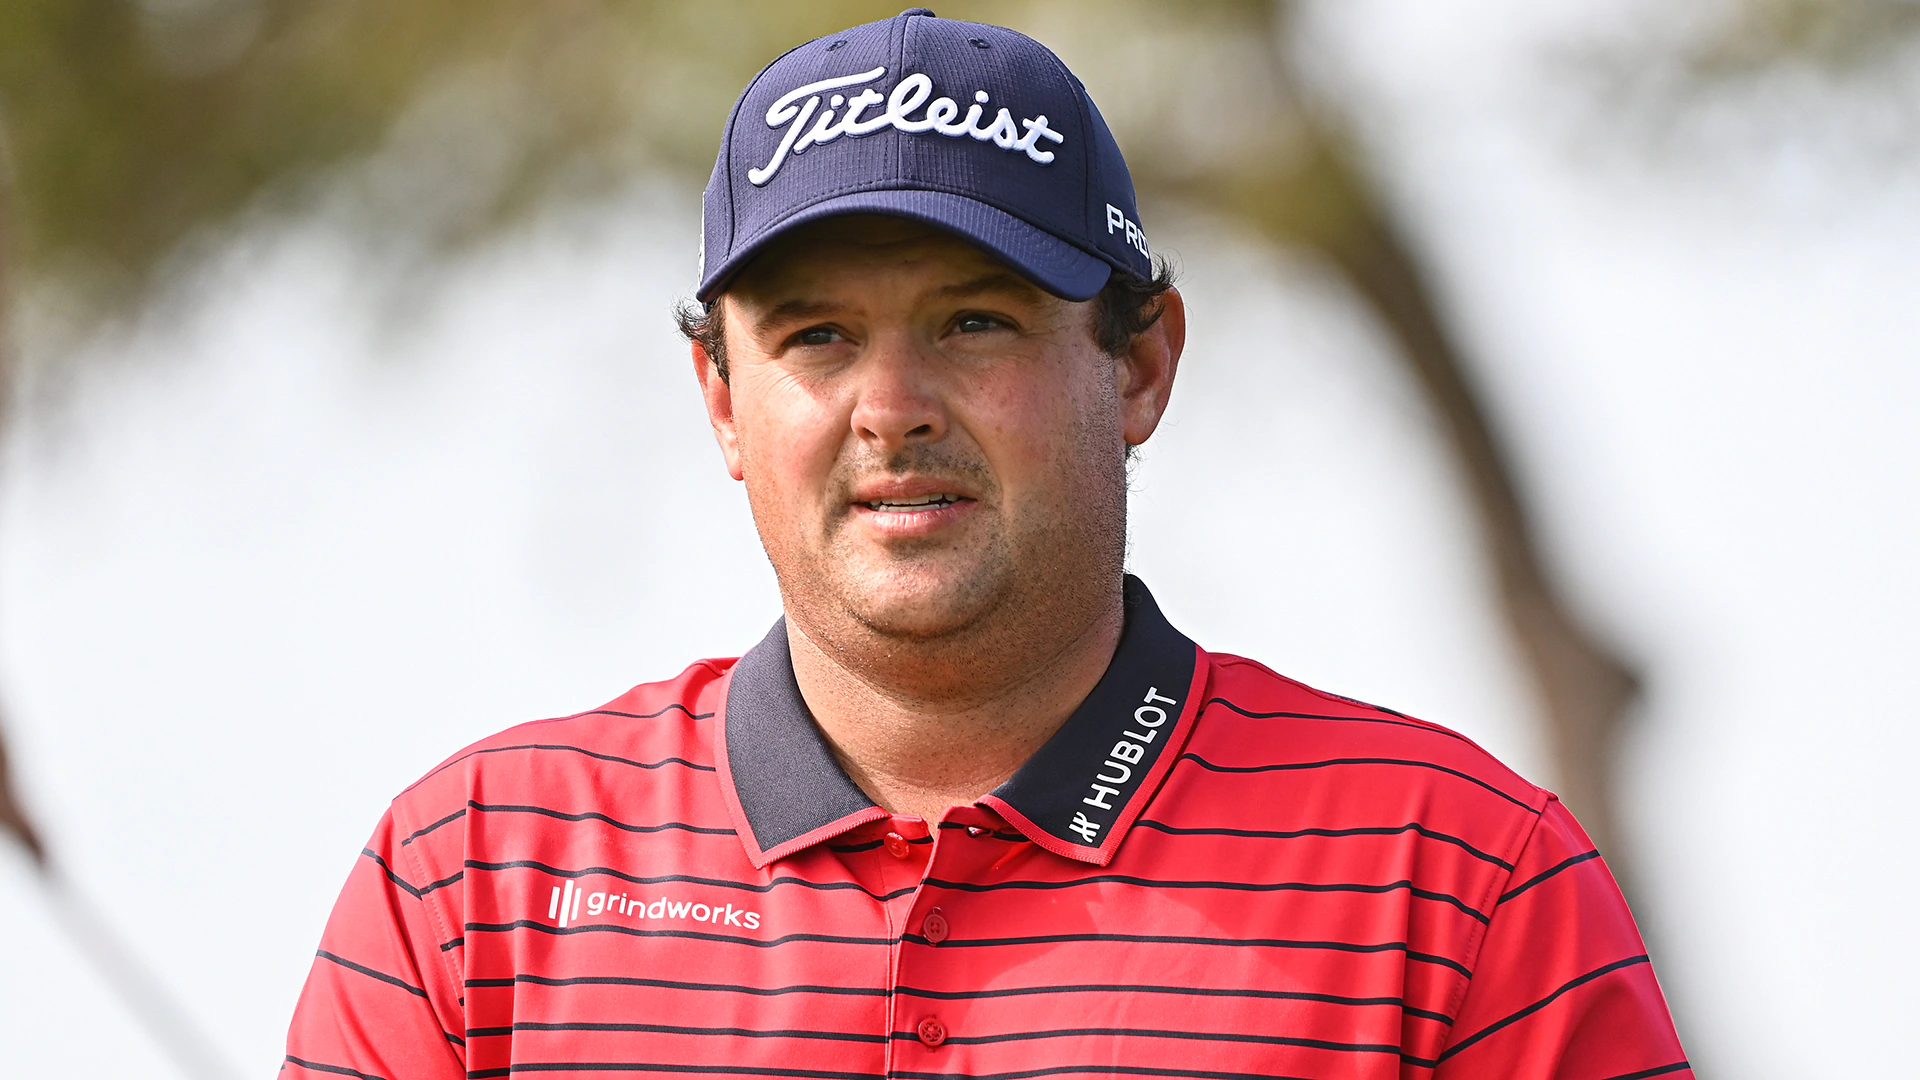 Patrick Reed’s Farmers win moves him inside U.S. Ryder Cup top six